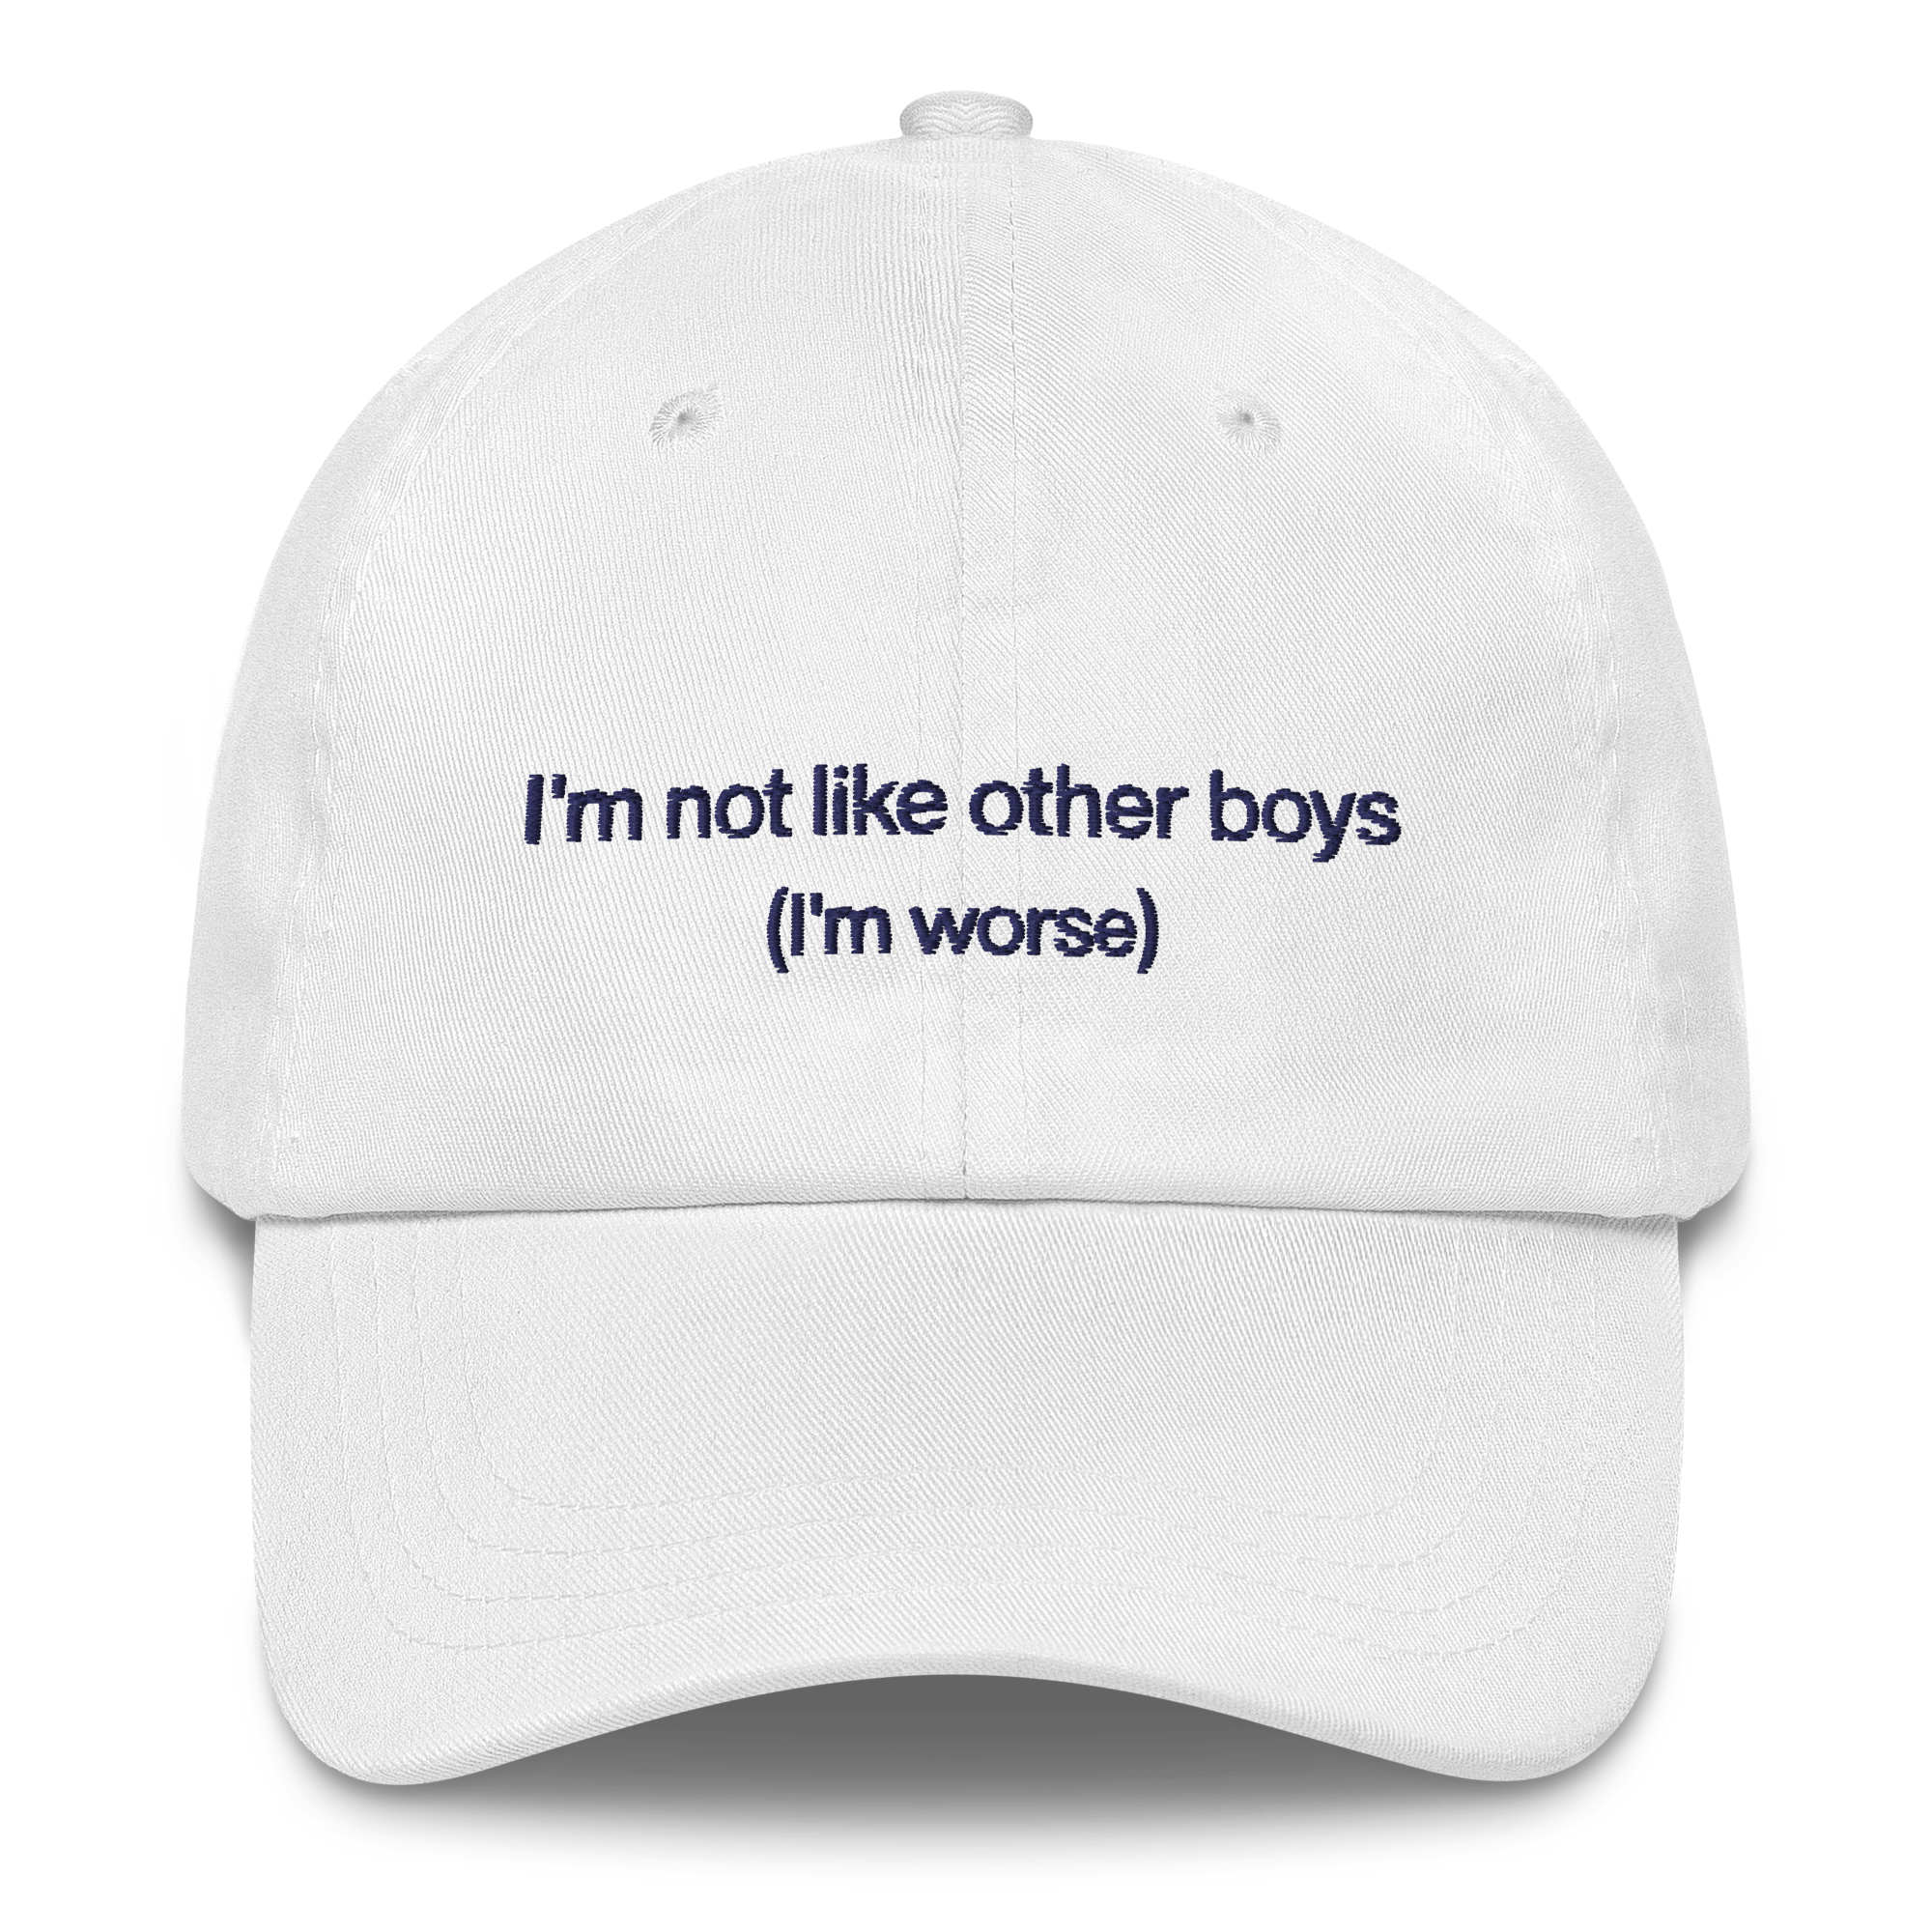 classic-dad-hat-white-front-667b1f899c716.png